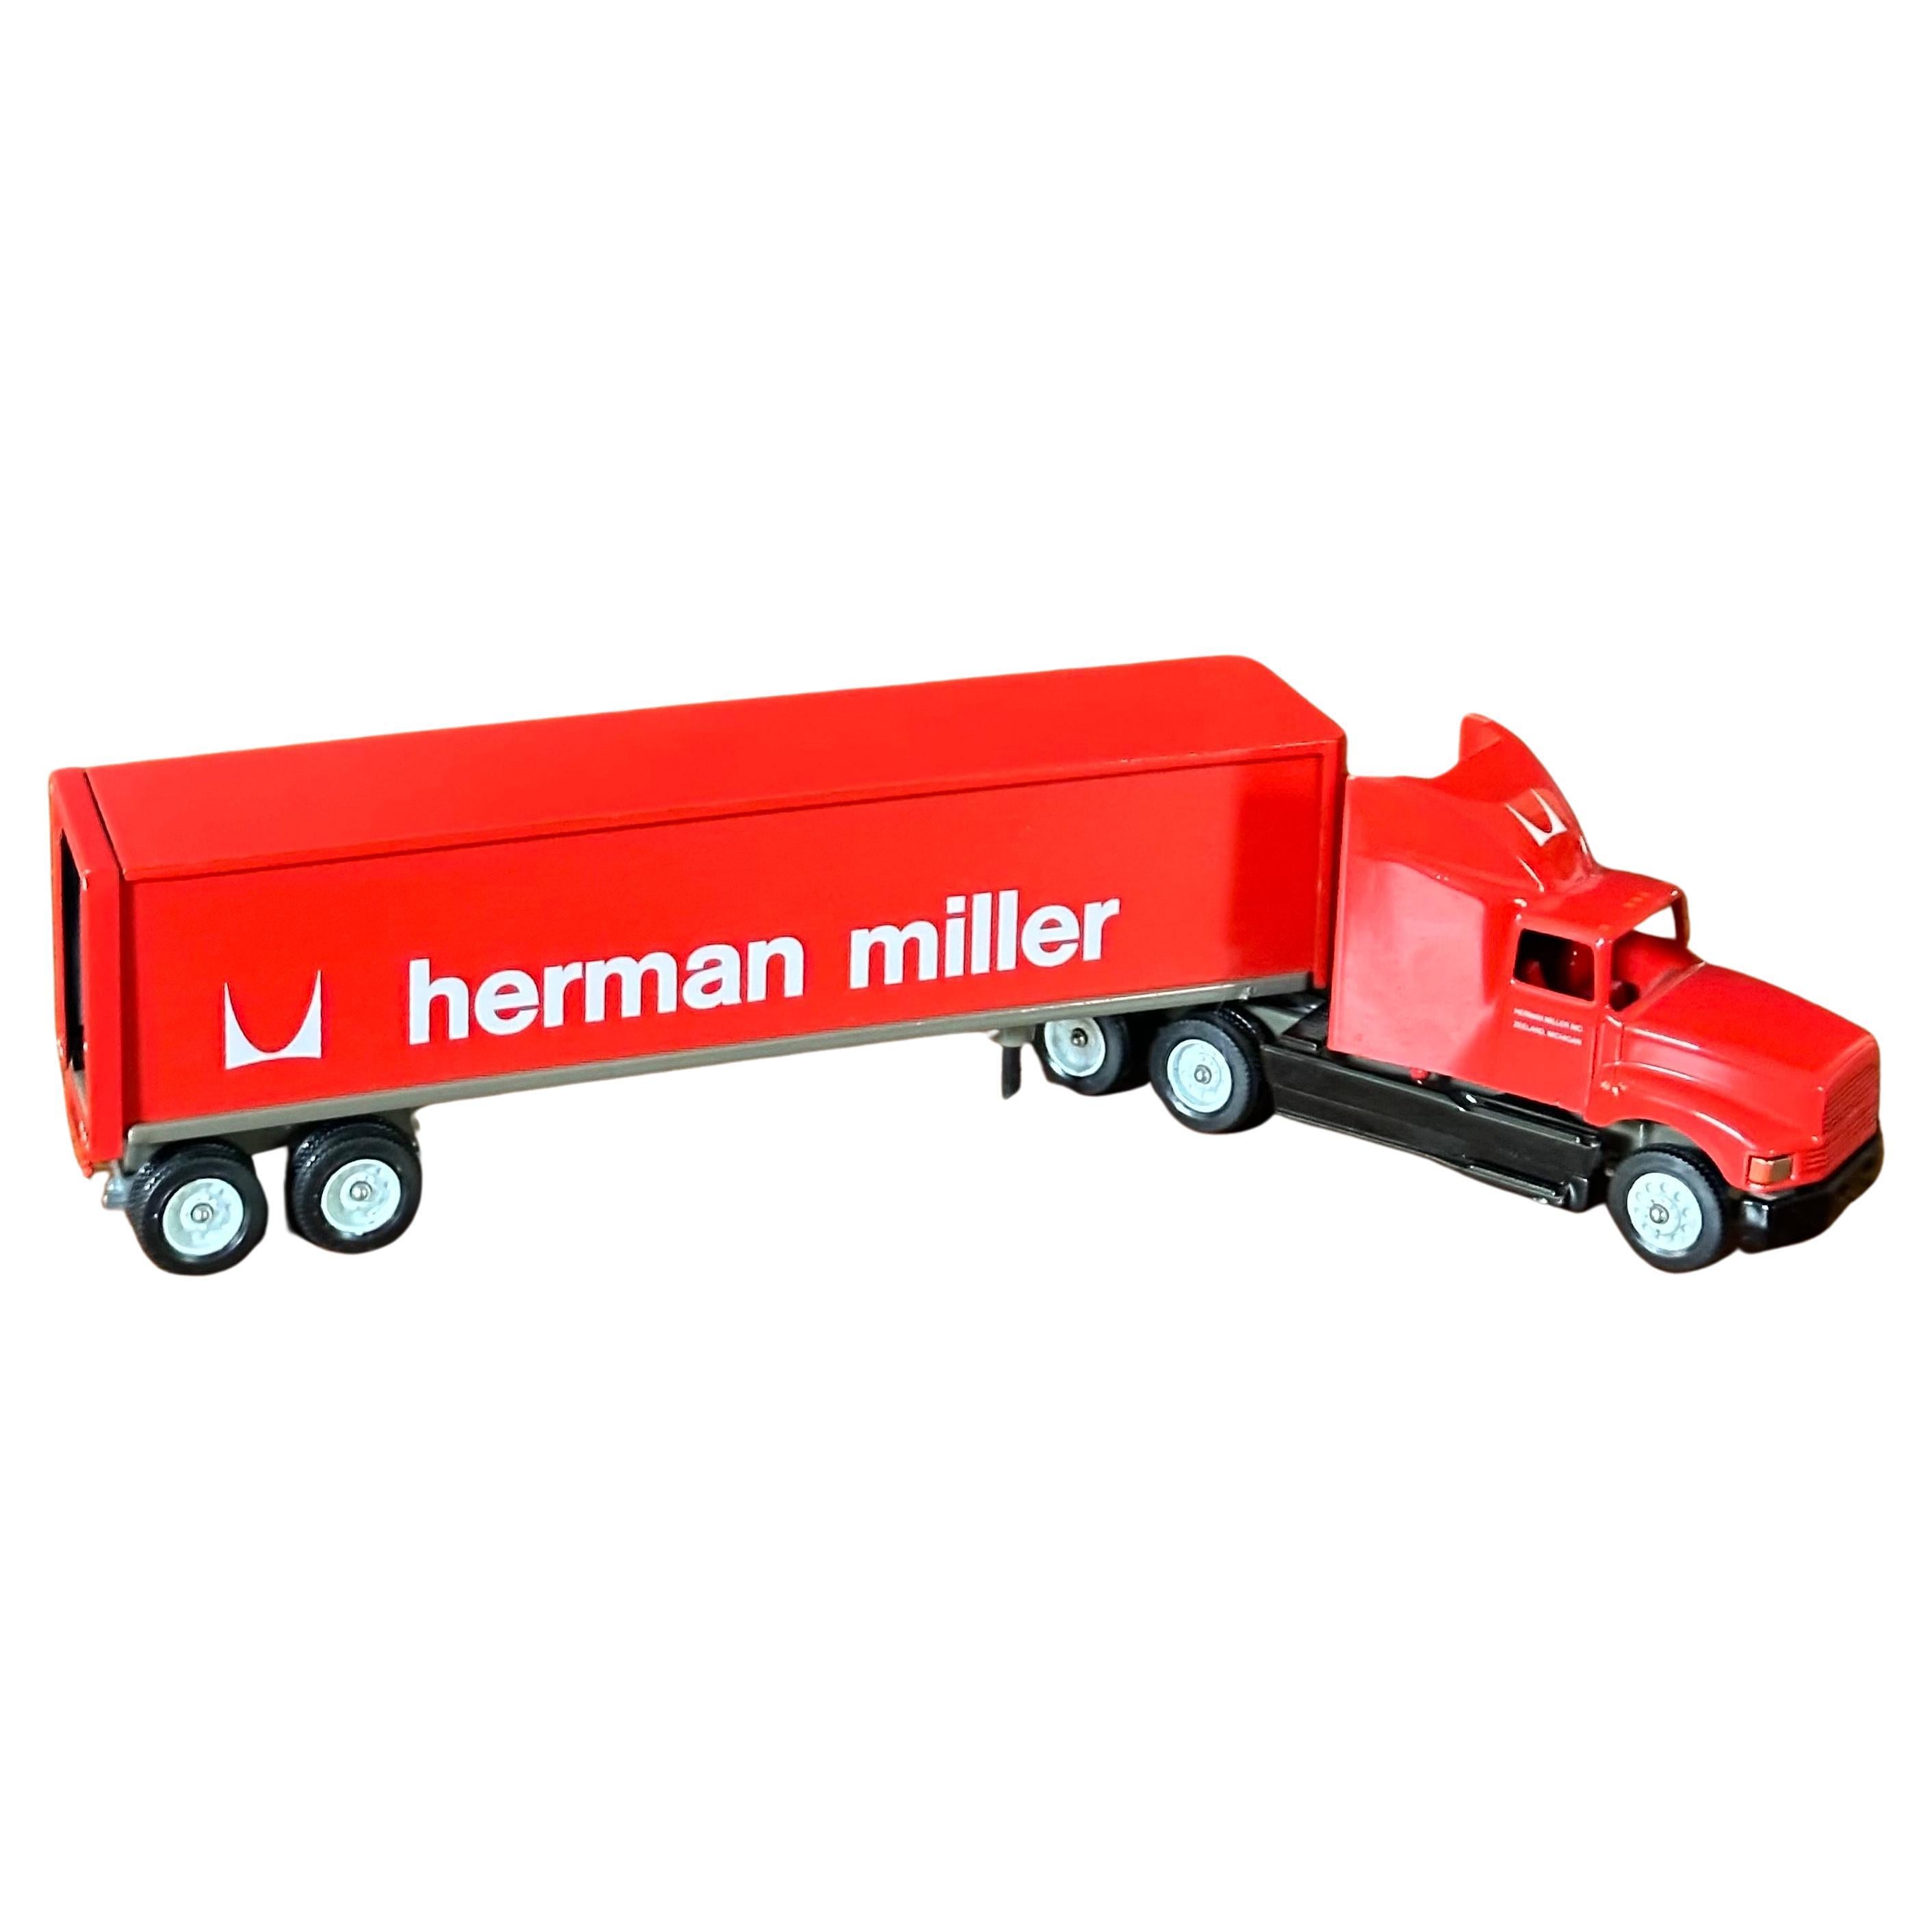 "Herman Miller" Tractor Trailer Truck Toy with Original Box by Winross USA For Sale